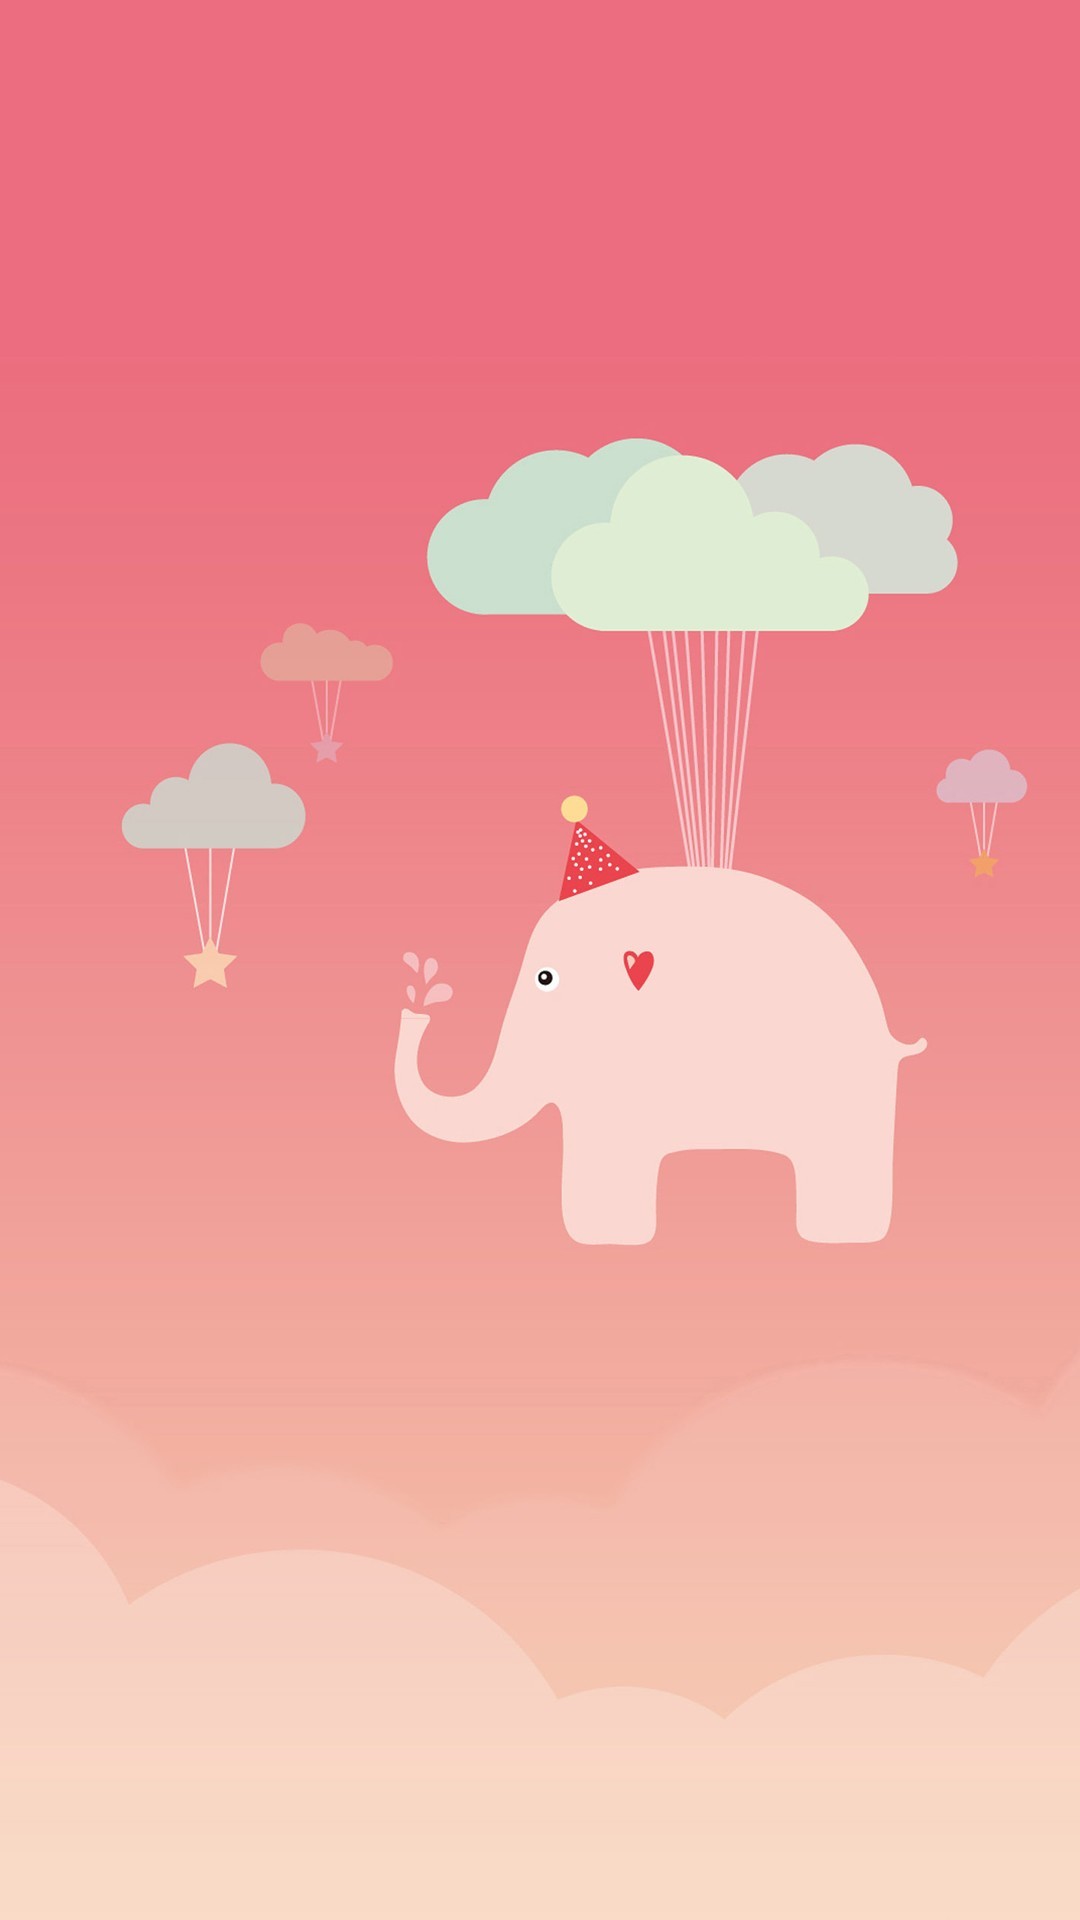 1080x1920 ... Cartoon Cute Iphone Wallpaper 10 Cute Elephant. Tap To See More Funny  IPhone Wallpapers Backgrounds ...